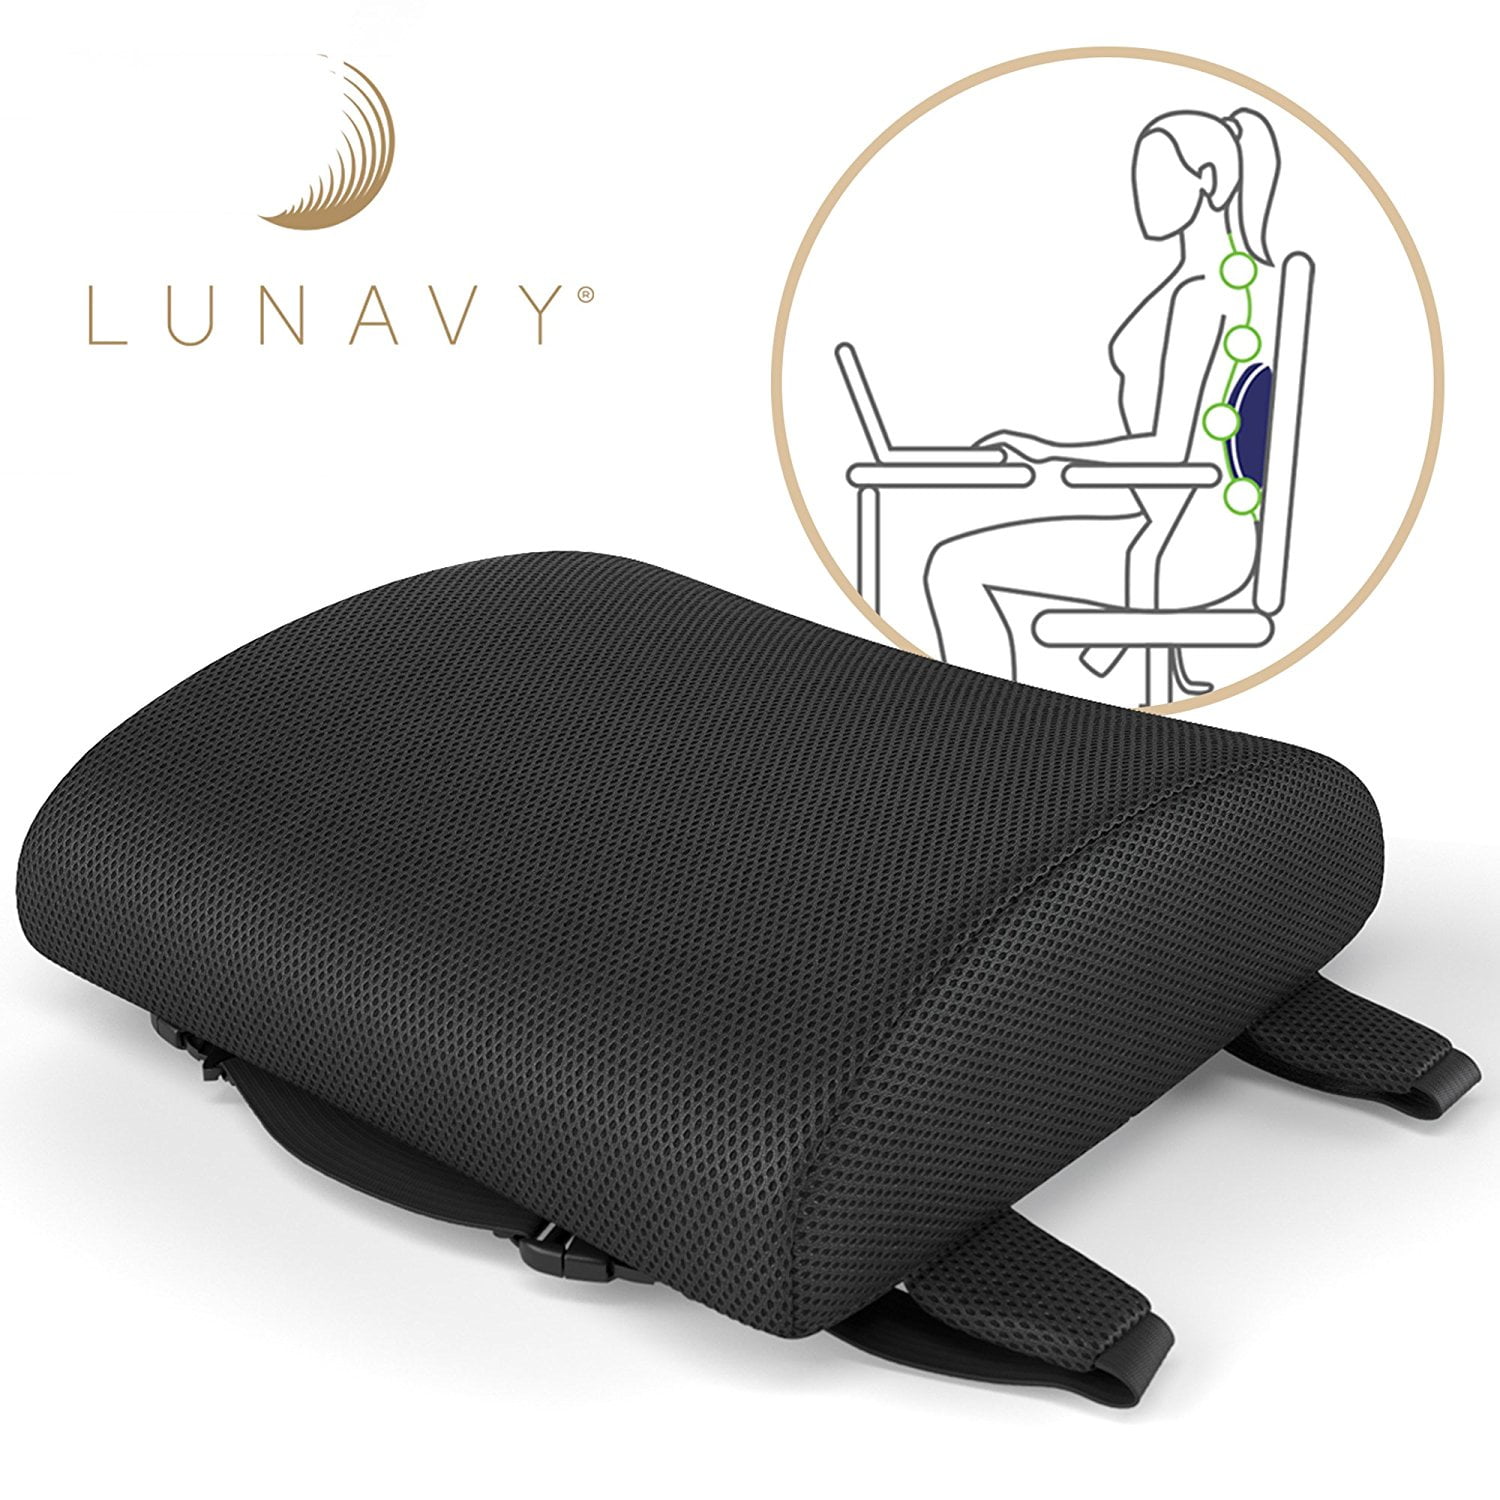 Lower Back Pain Relief Orthopedic Memory Foam Lumbar Support Cushion Custom Carry Bag! Back Rest for Office Chair & Car Seat| Improve Posture Naturally| 2 Adjustable Straps for Sitting Comfort 